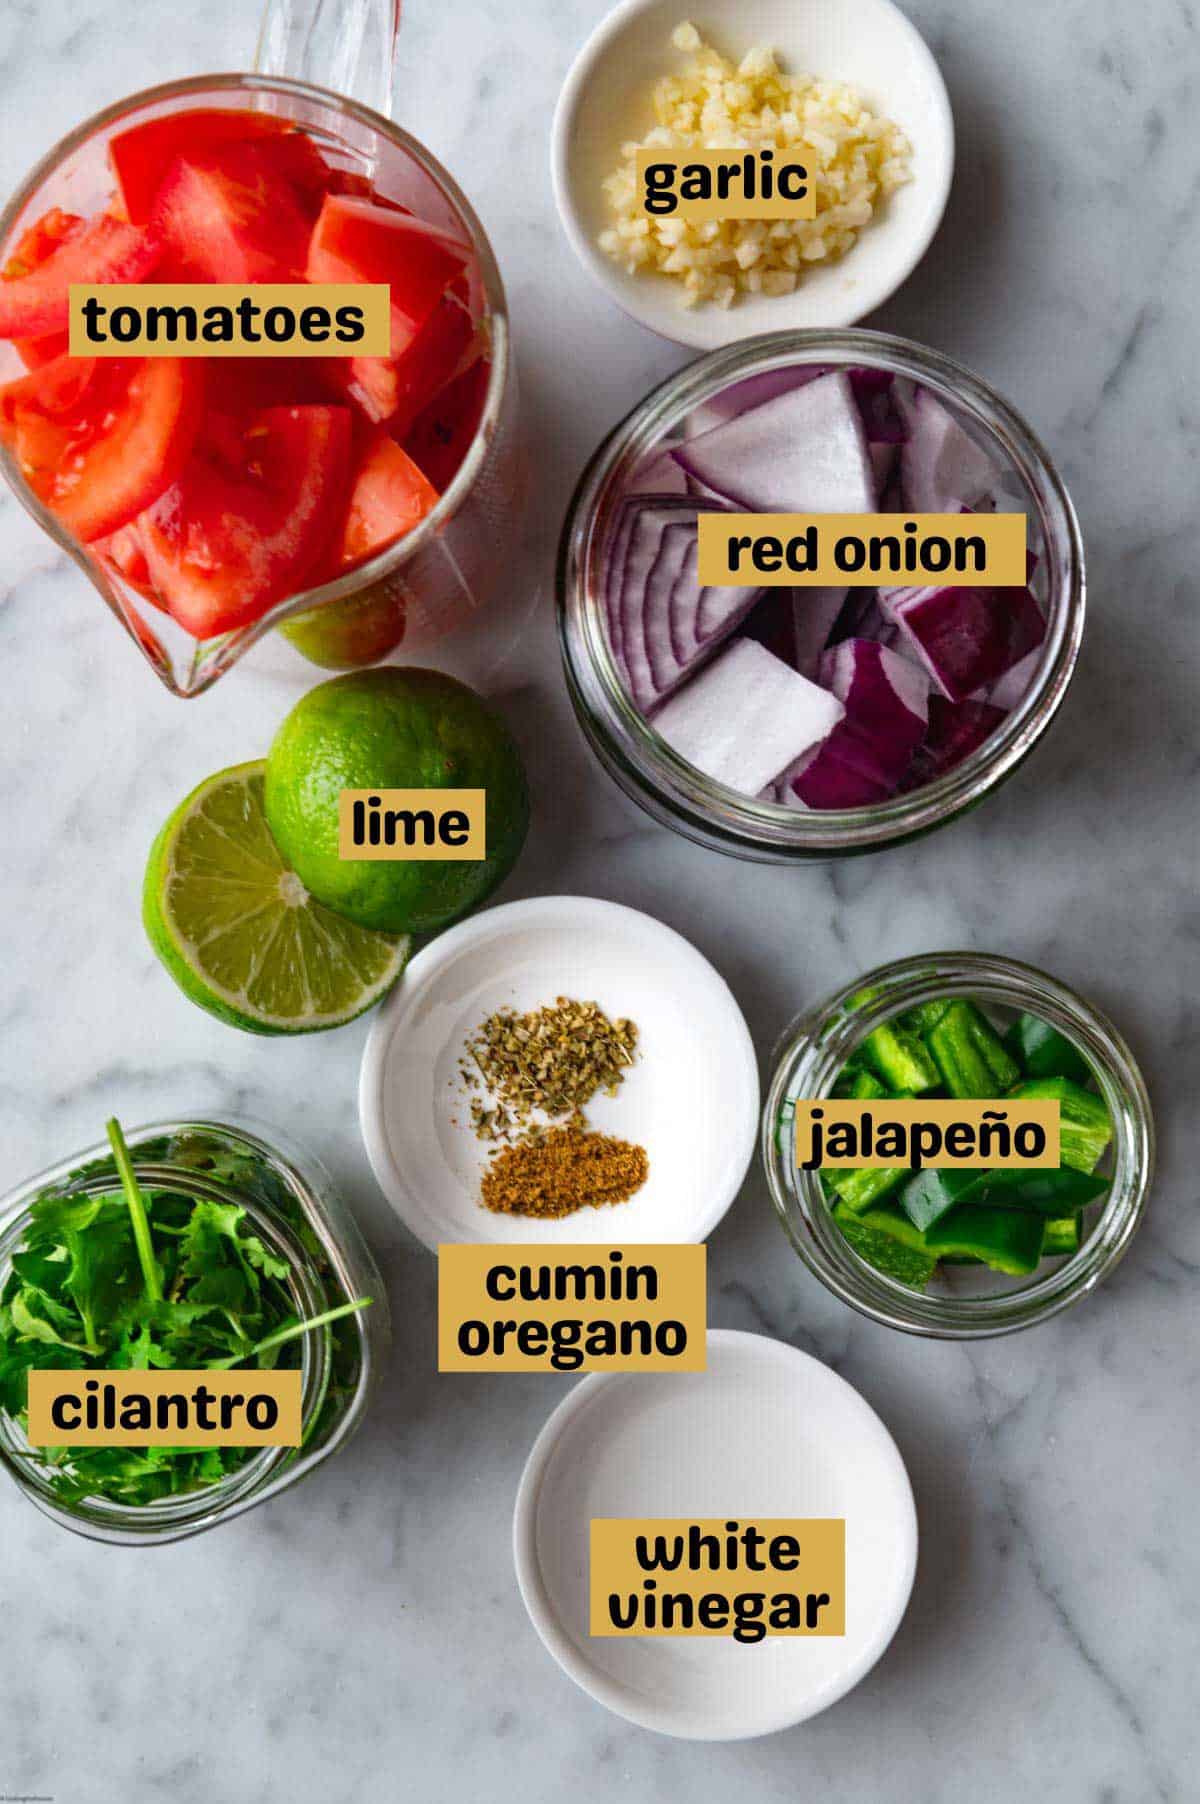 Chopped tomatoes, red onion, and cilantro in separate glass jars, with white vinegar, cumin and oregano, and minced garlic in white bowls, and one sliced lime.